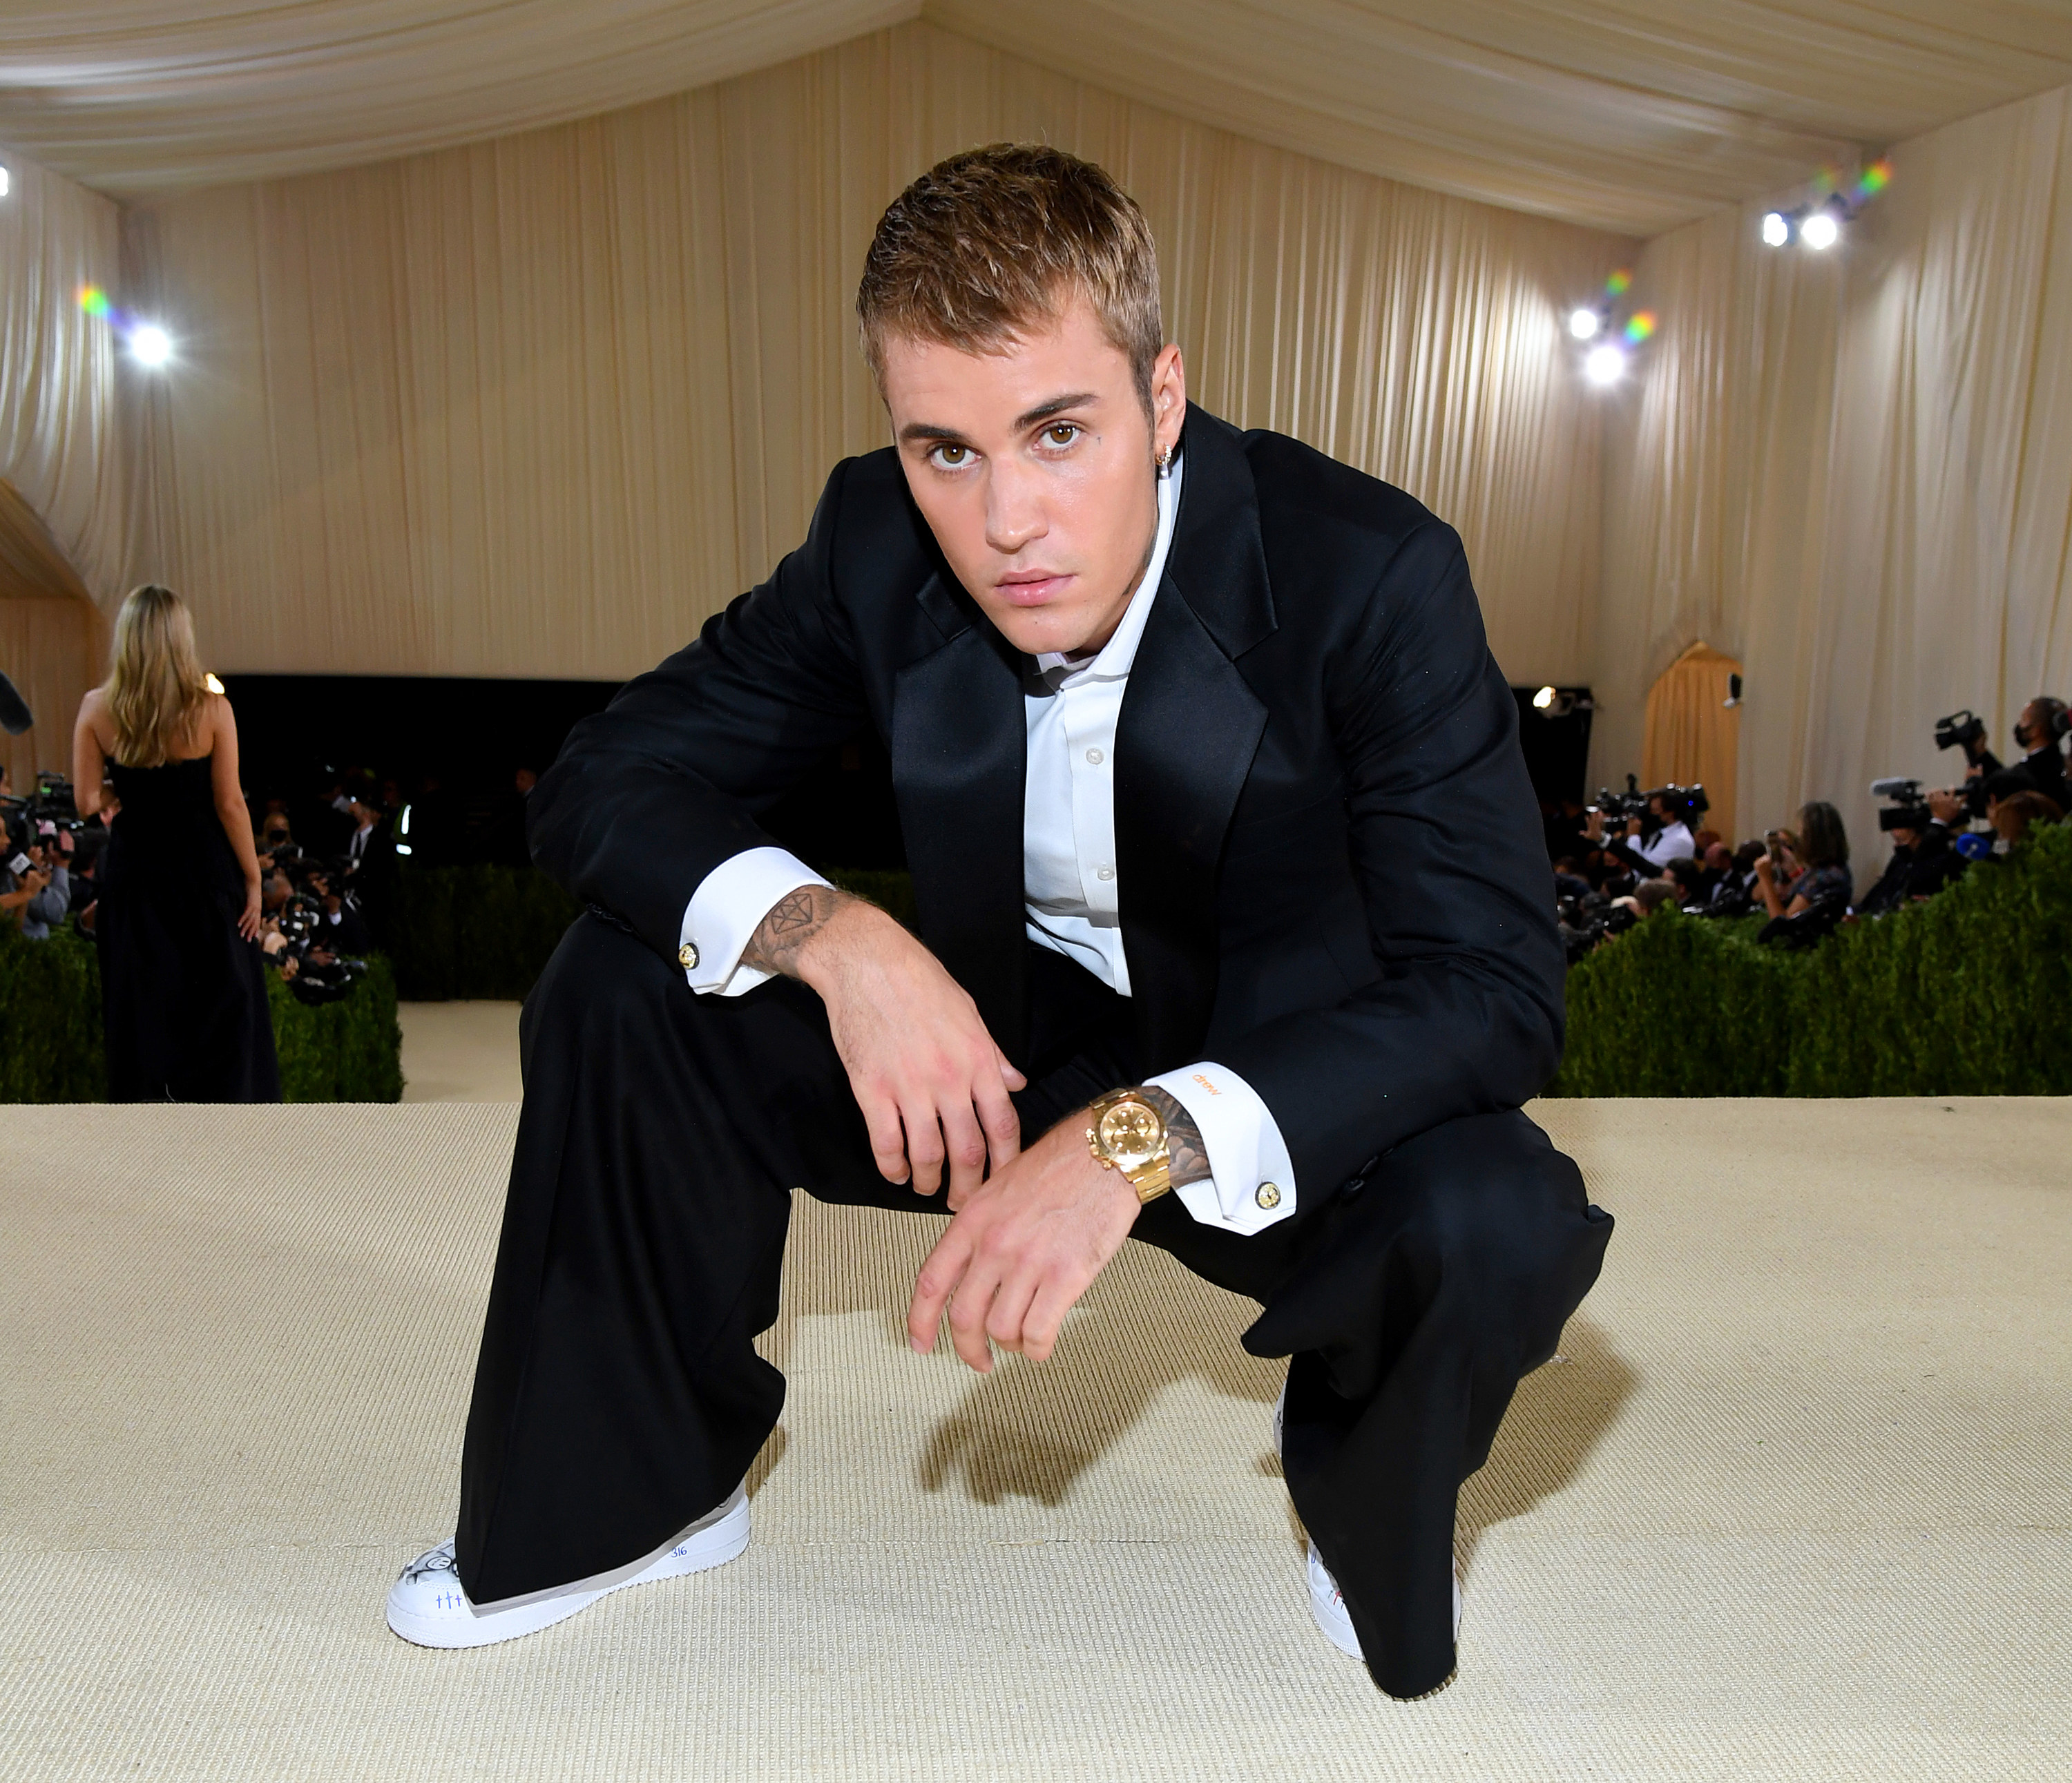 Justin Bieber attends The 2021 Met Gala on September 13, 2021 in New York City